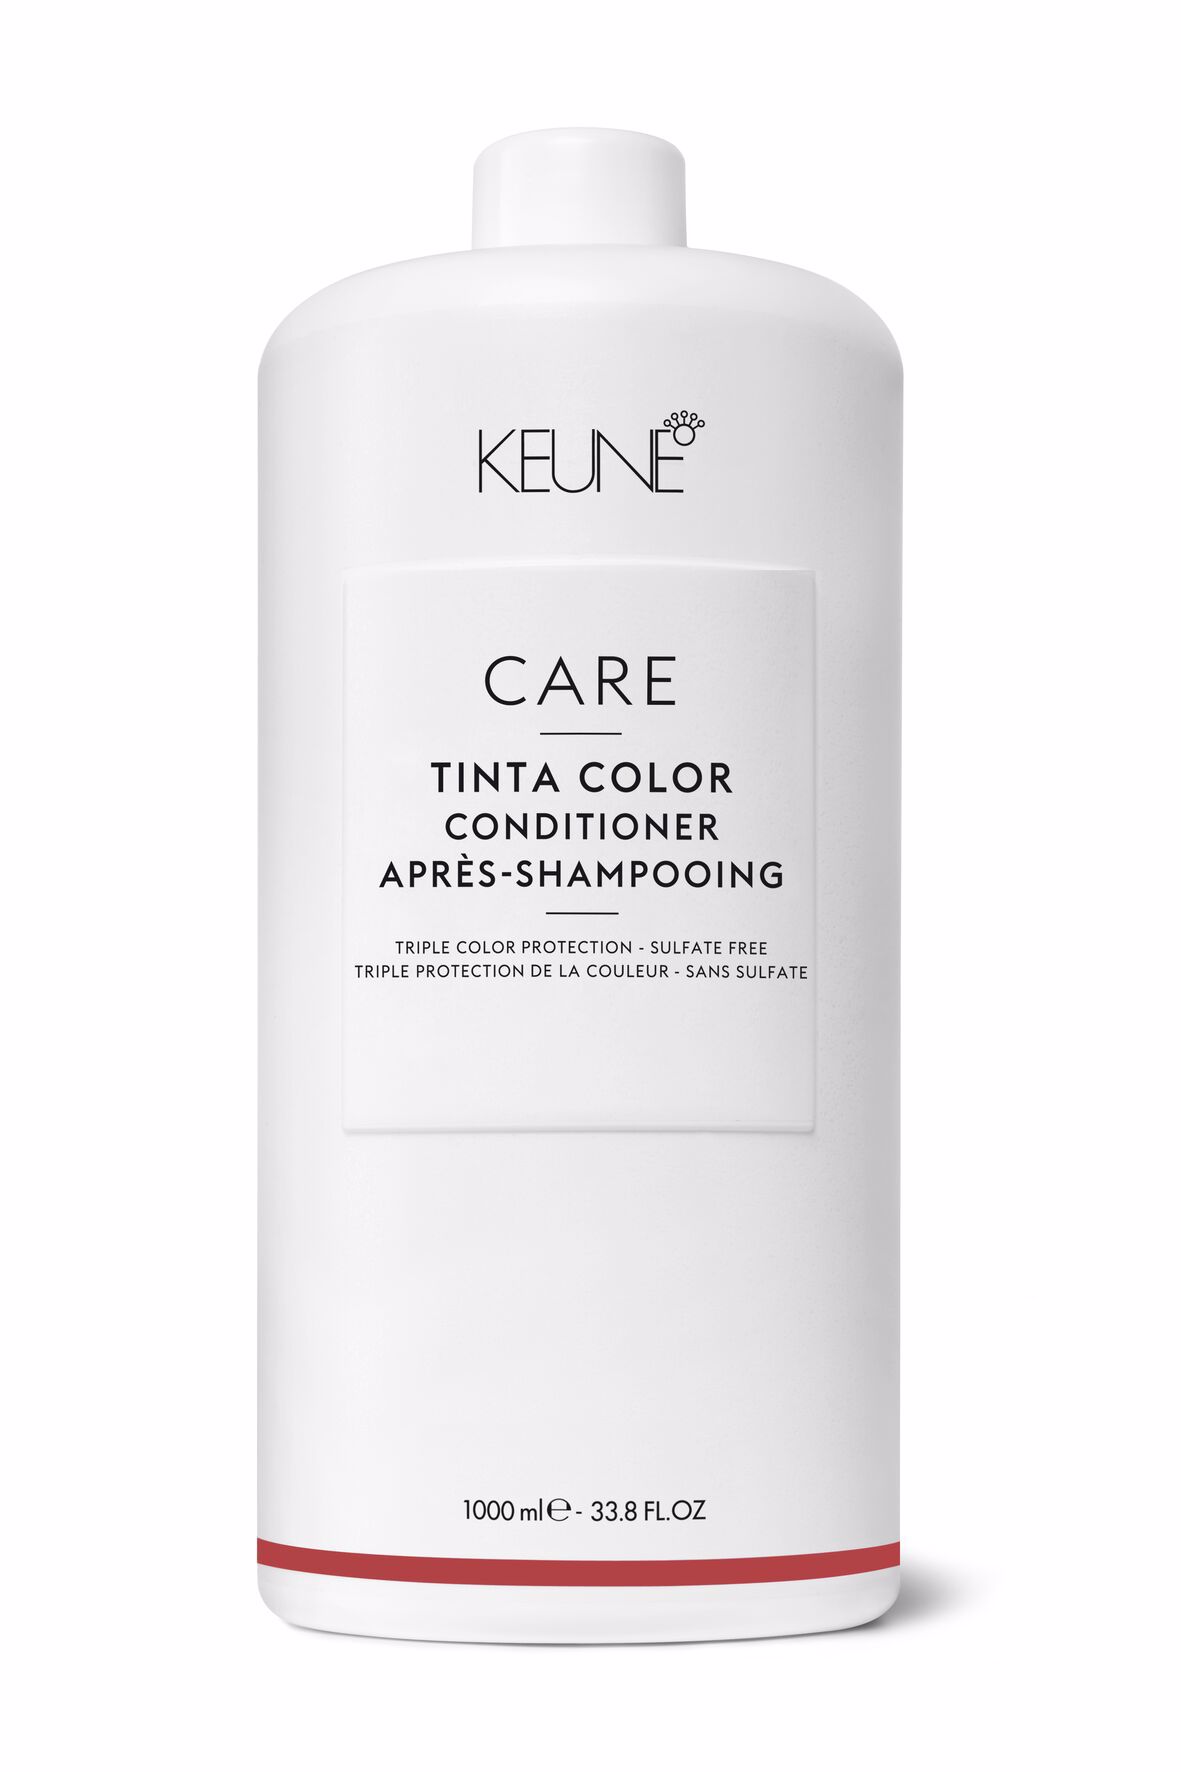 Discover Care Tinta Color Conditioner: a hair product that revitalizes and nourishes dyed hair, prevents color fading, and offers long-lasting color brilliance. Gluten-free. Keune.ch.